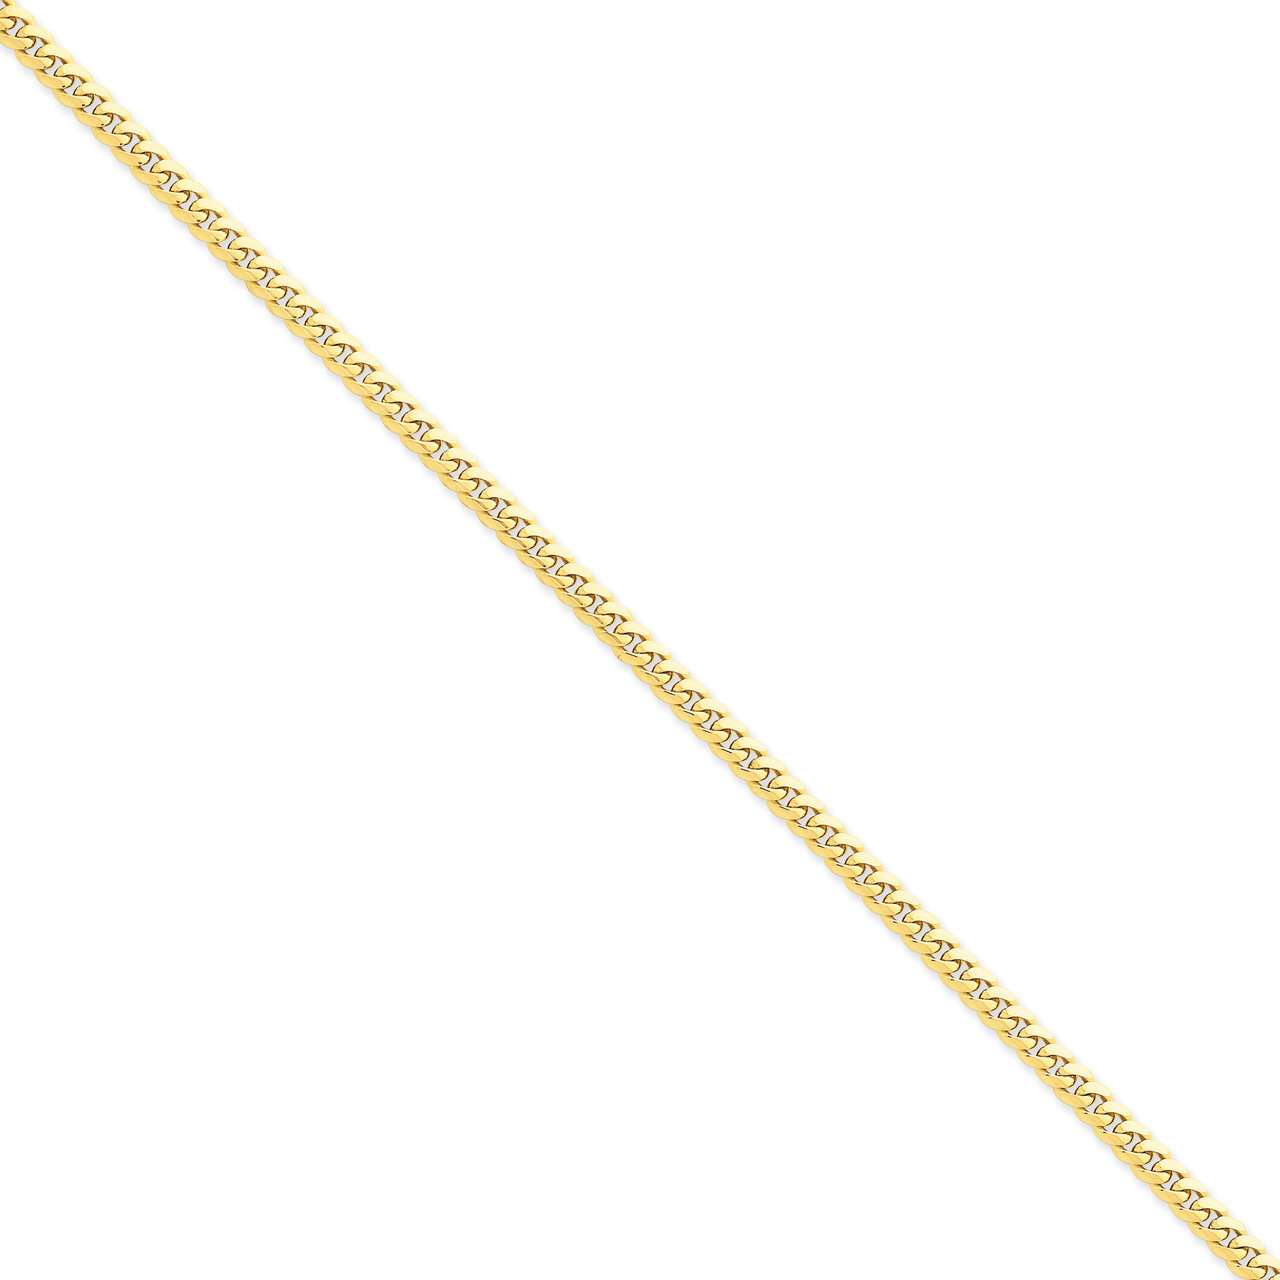 7 Inch 4.0mm Domed Curb Chain 14k Gold DCU120-7